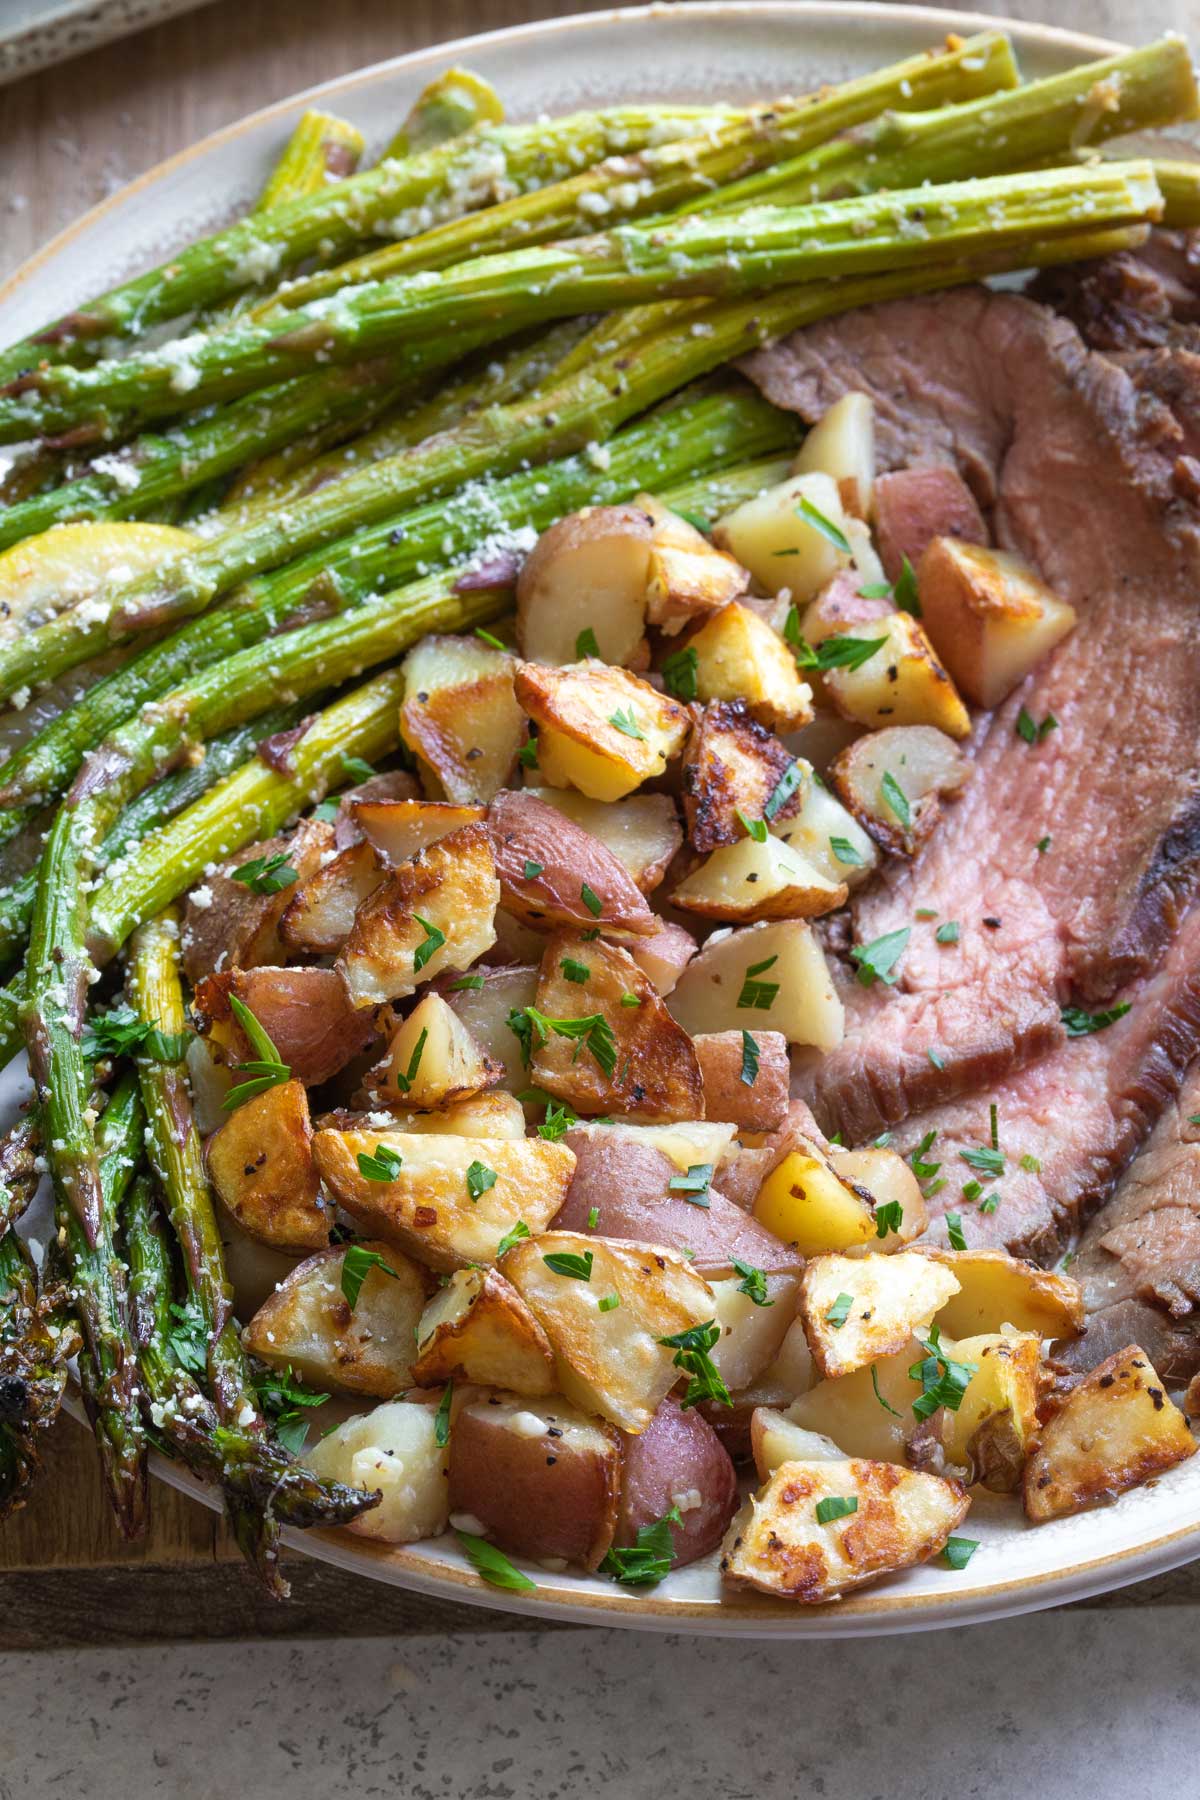 Dinner plate with potatoes, asparagus and grilled steak slices.